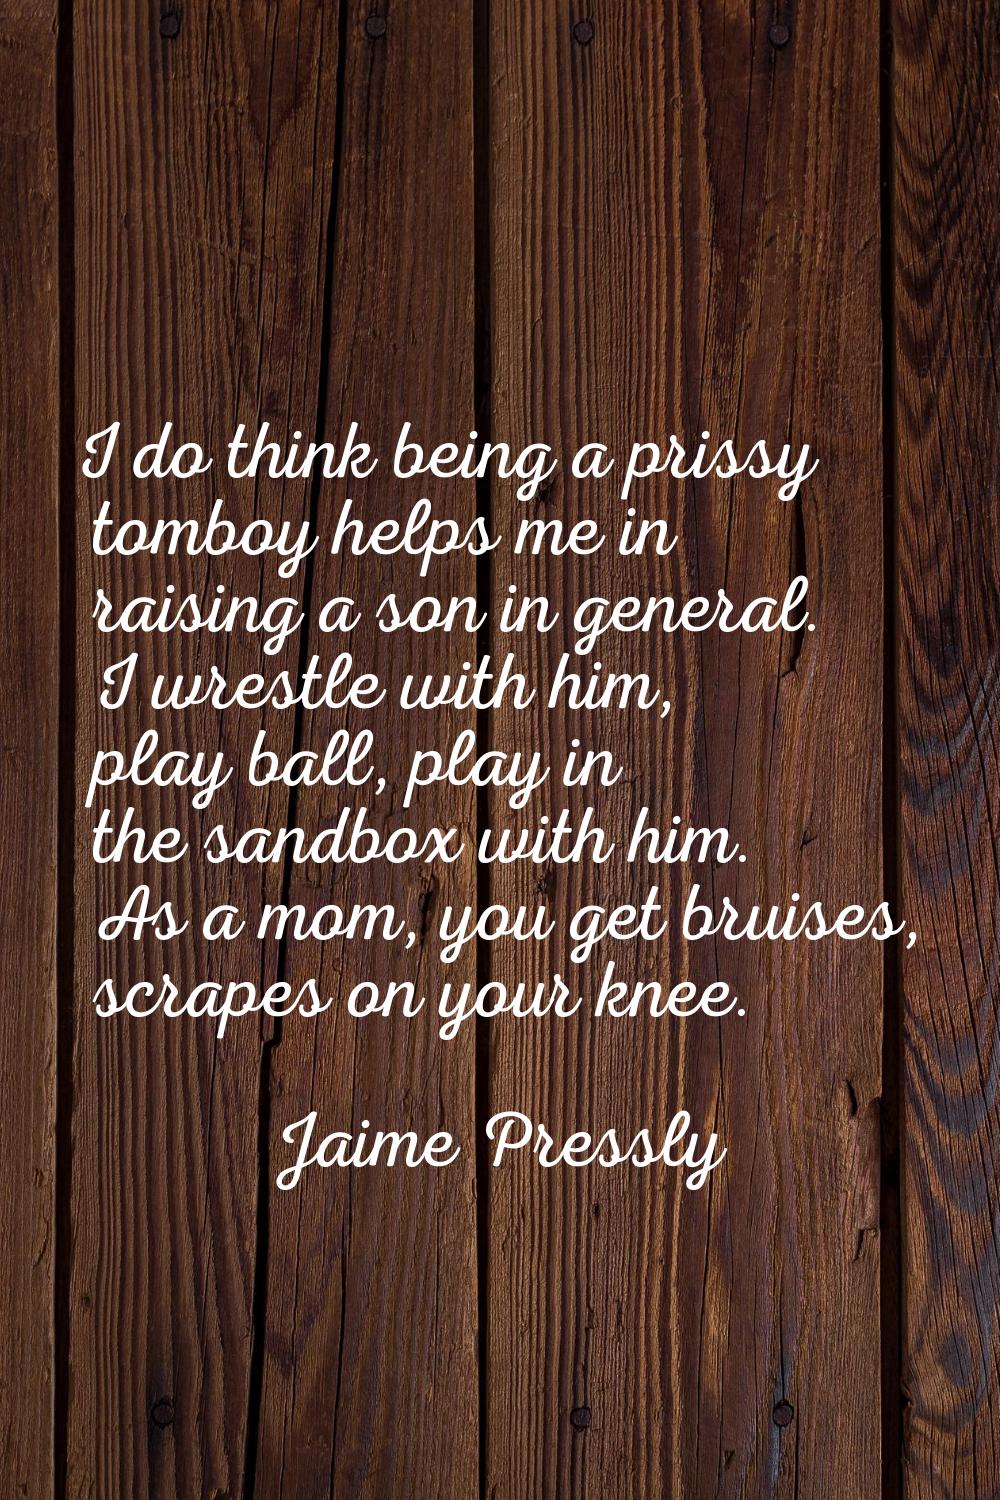 I do think being a prissy tomboy helps me in raising a son in general. I wrestle with him, play bal